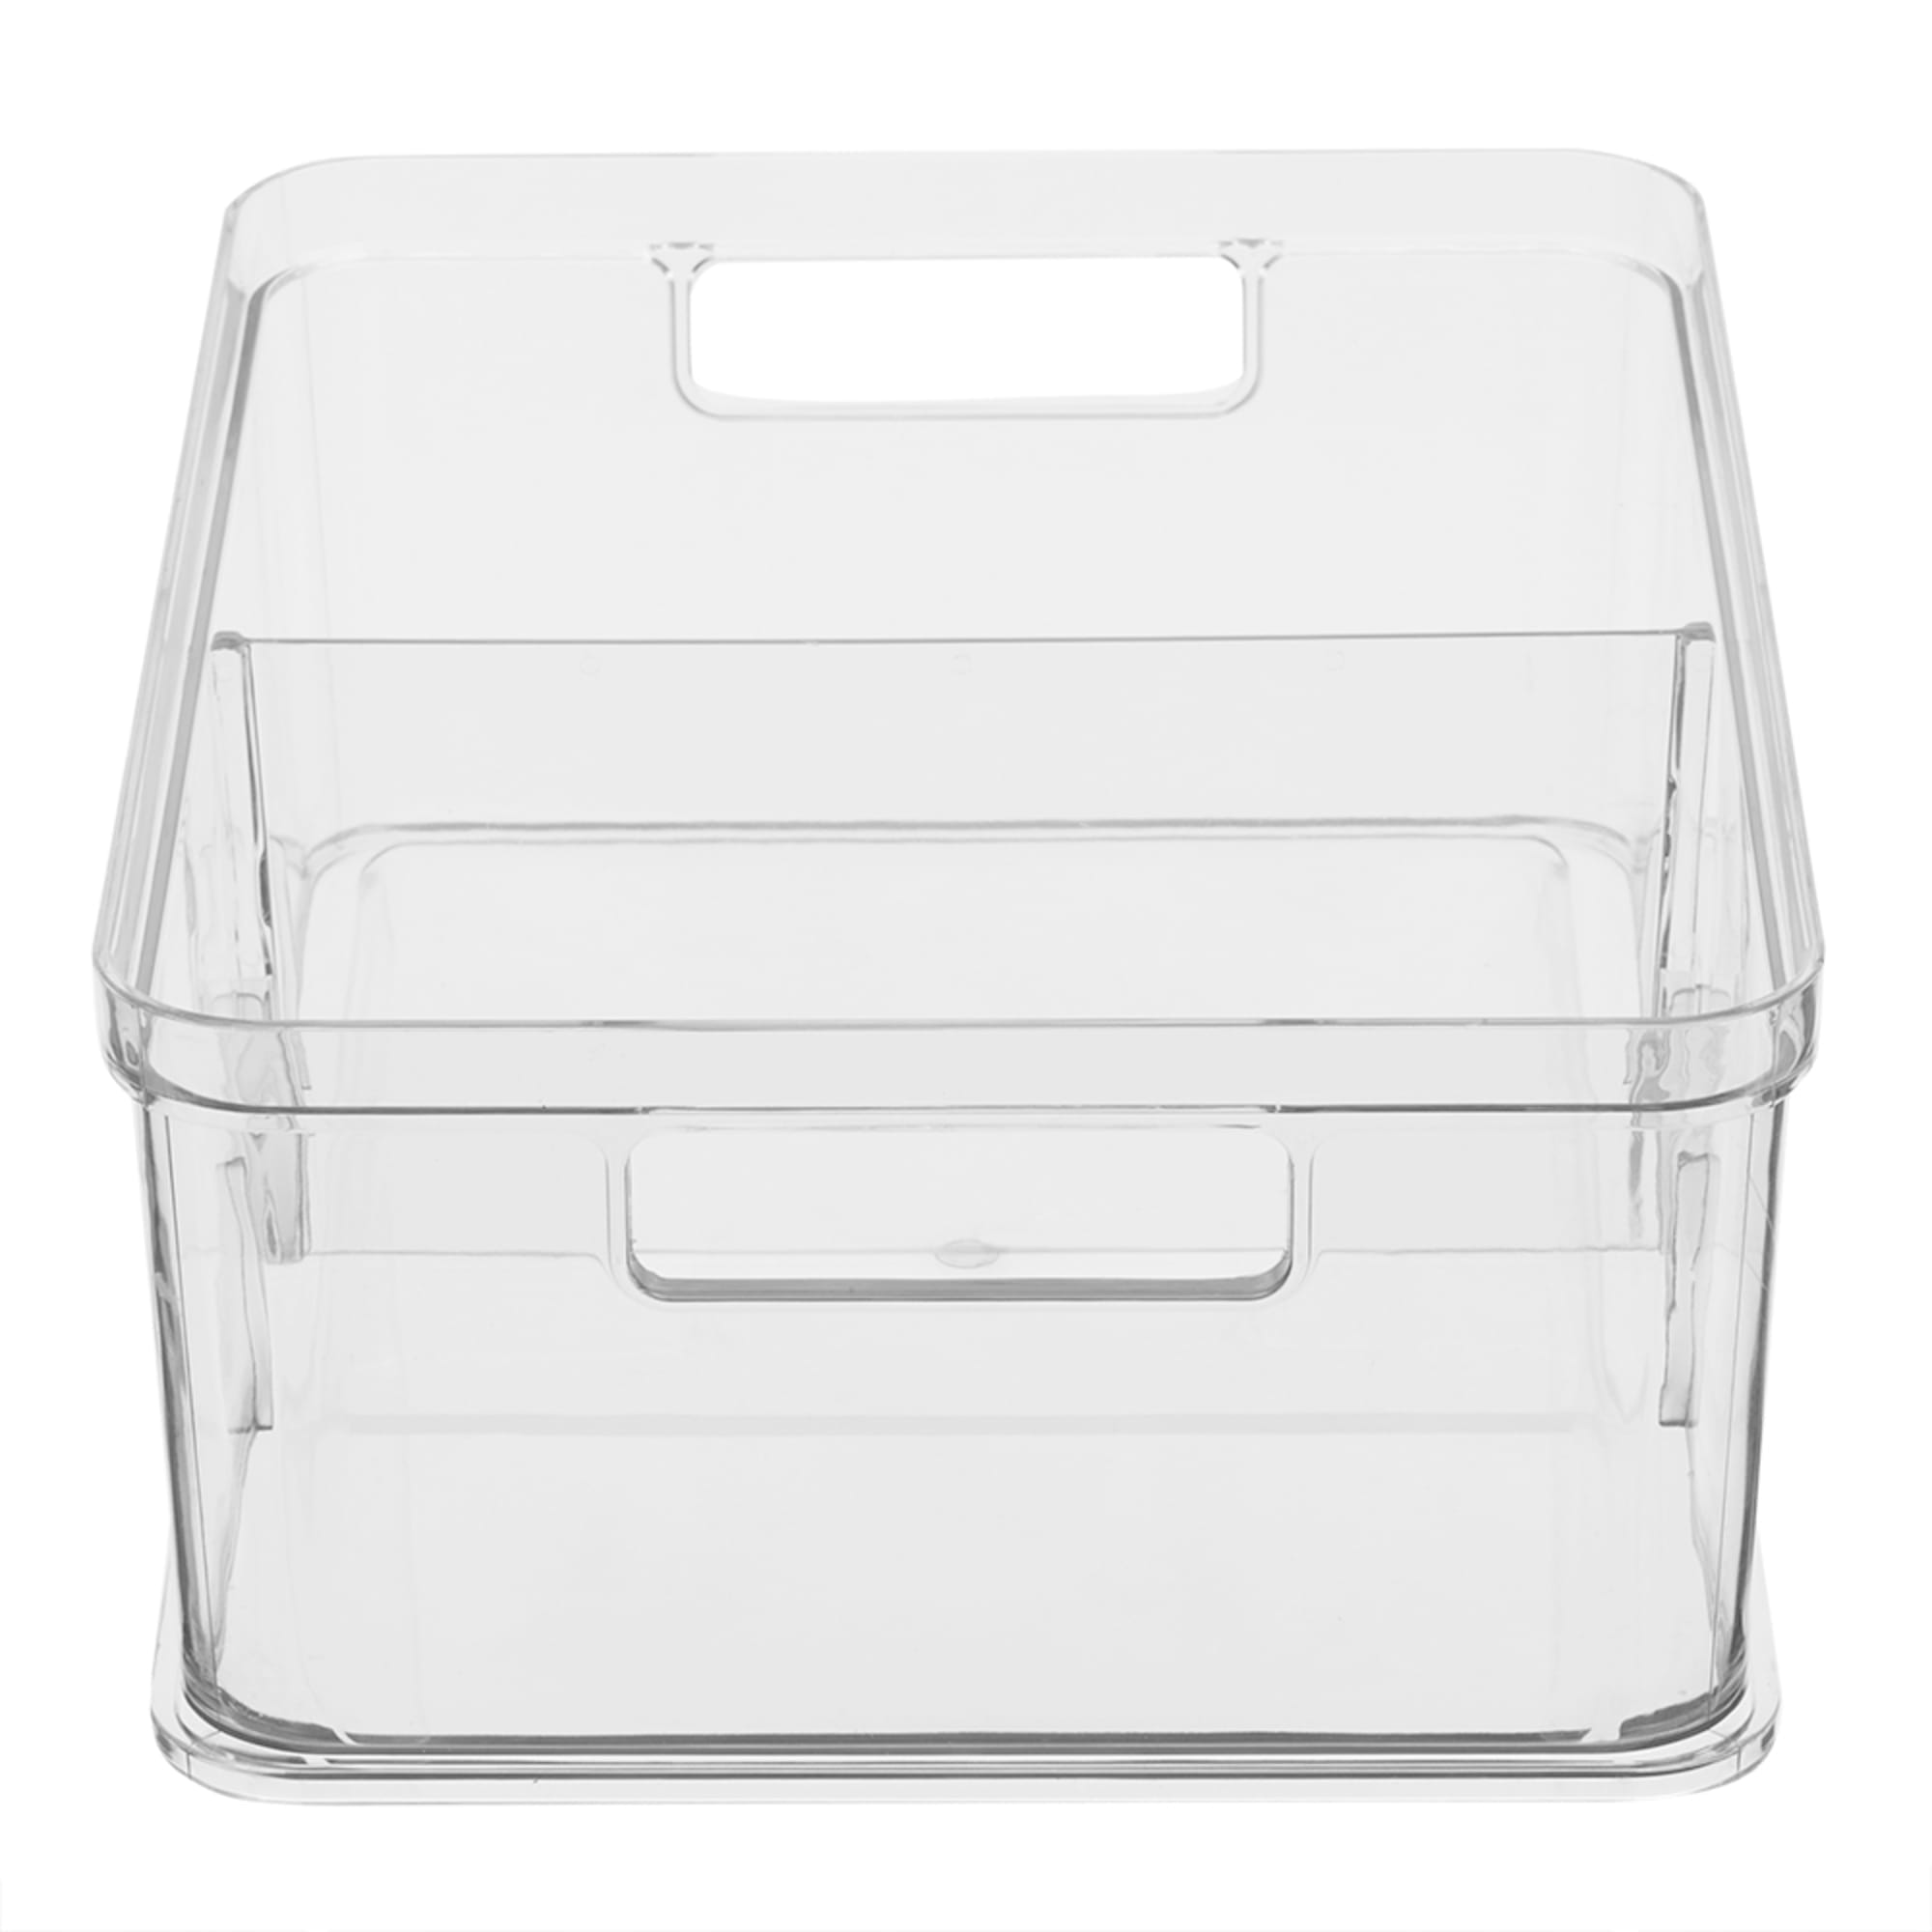 Home Basics Plastic Storage Bin With Divider, Clear $6.50 EACH, CASE PACK OF 12